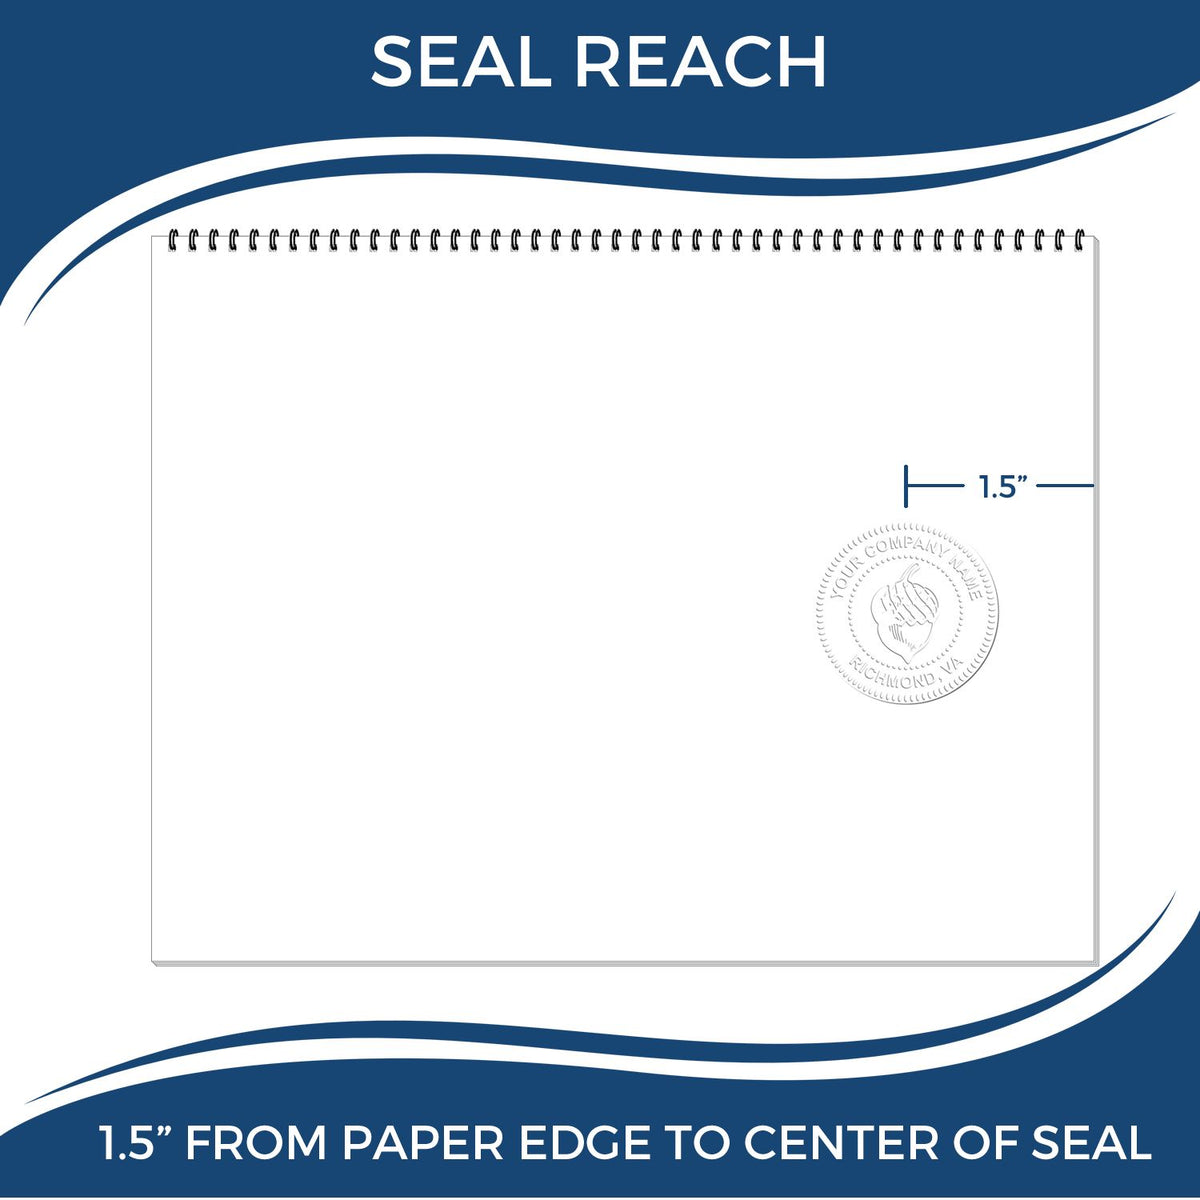 An infographic showing the seal reach which is represented by a ruler and a miniature seal image of the Handheld Massachusetts Land Surveyor Seal